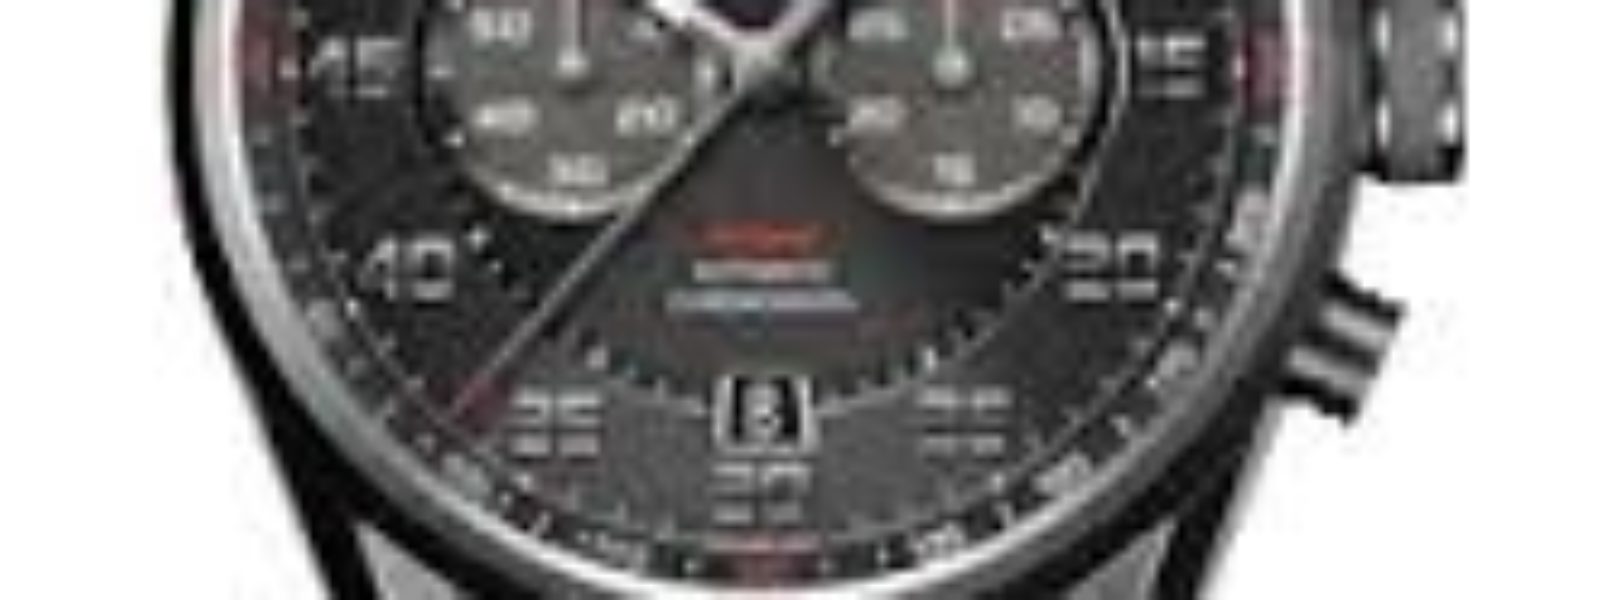 Tag Heuer Archives - WatchReport.com